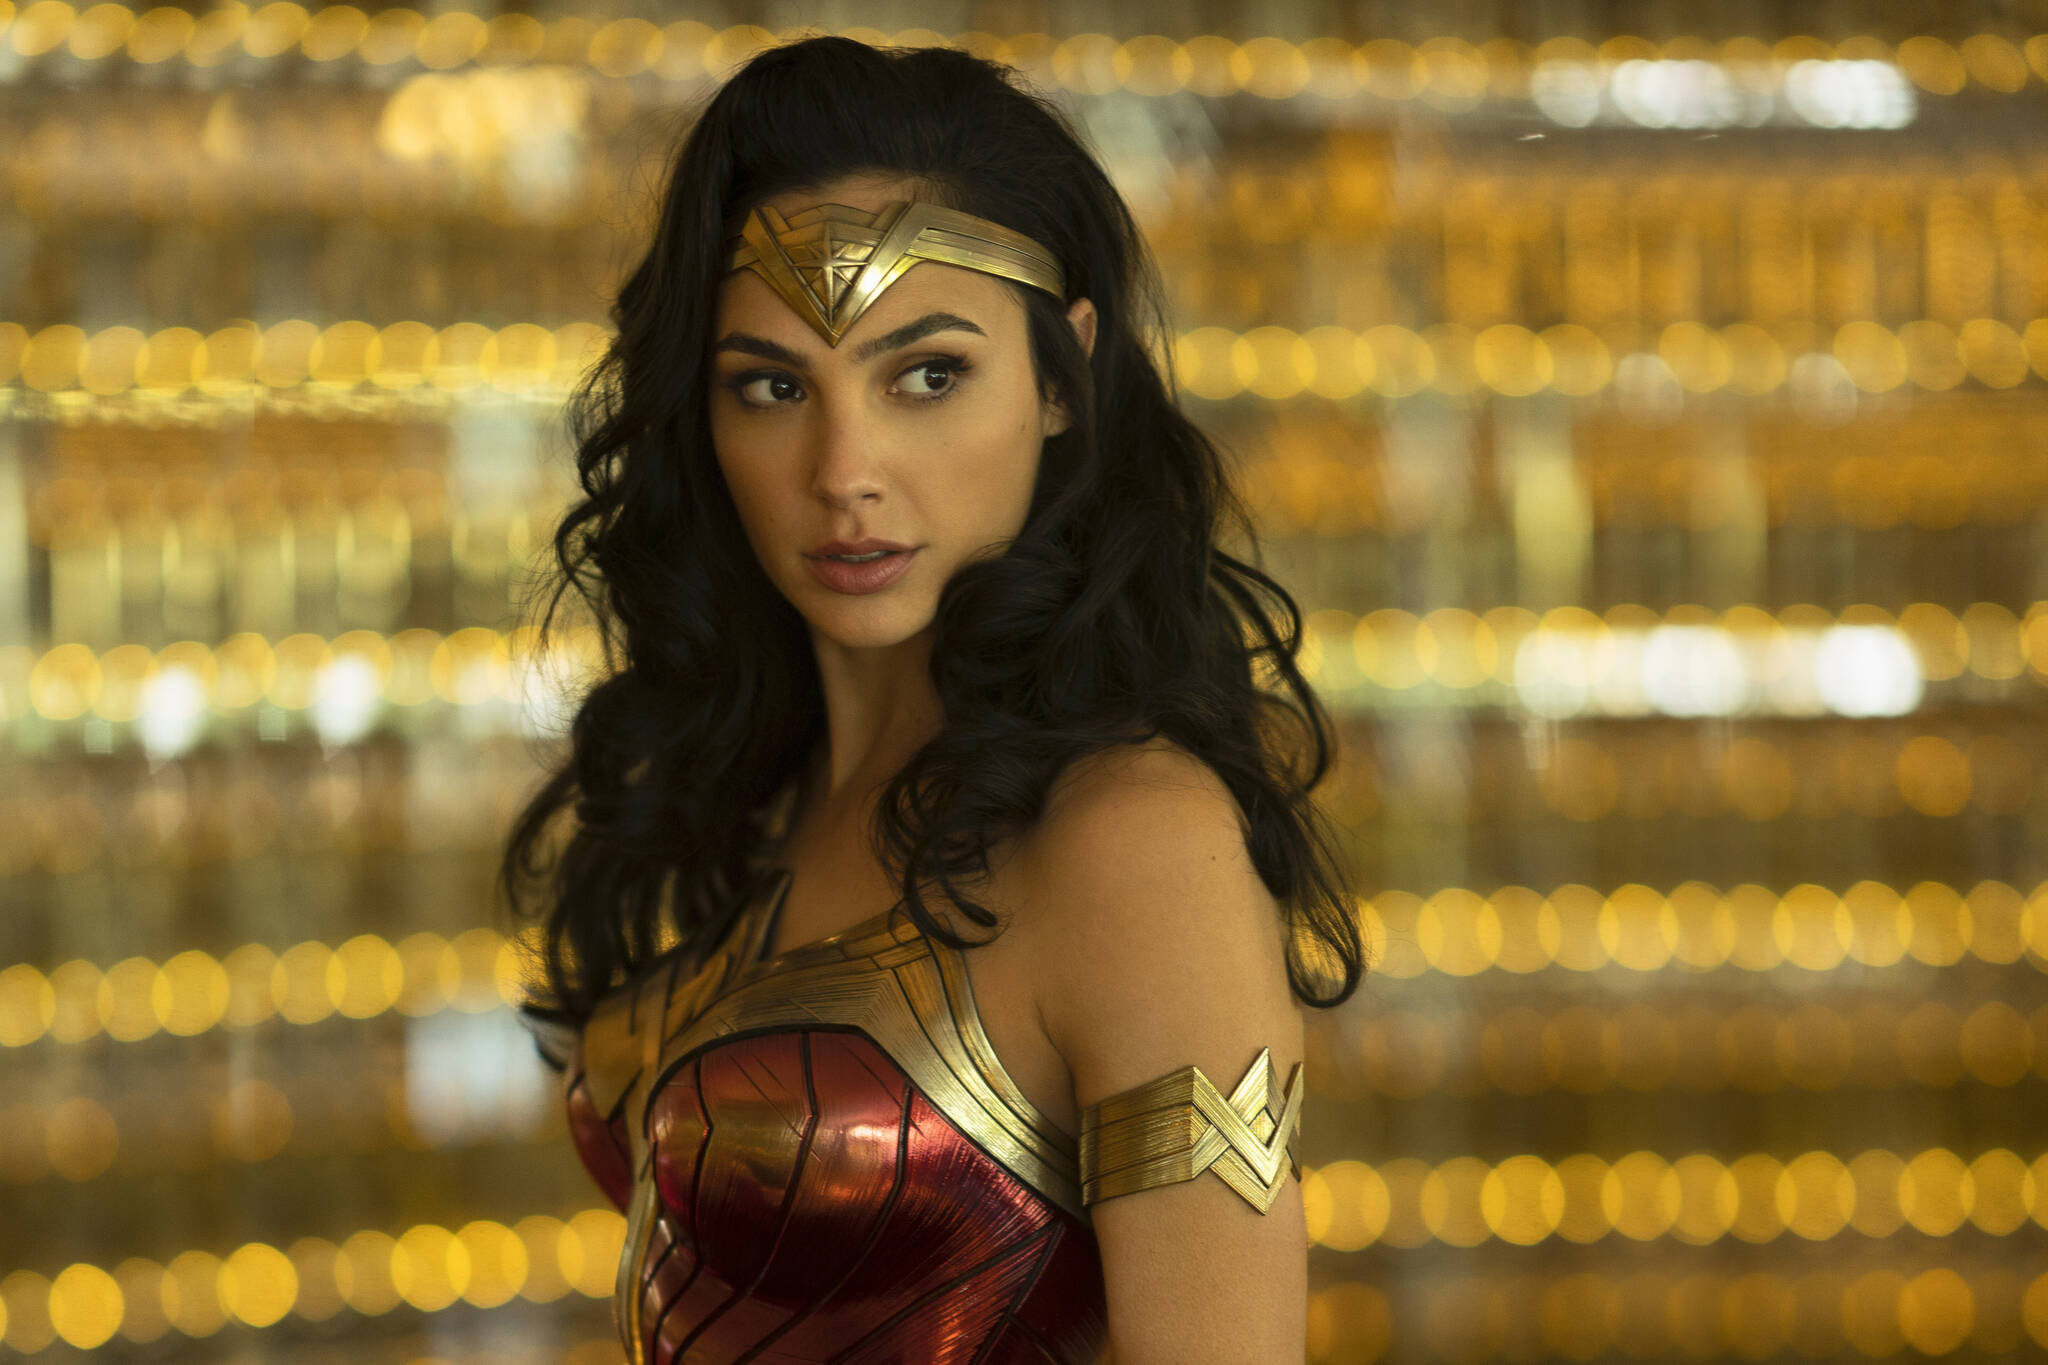 This image released by Warner Bros. Entertainment shows Gal Gadot in a scene from “Wonder Woman 1984.” (Clay Enos/Warner Bros. via AP)